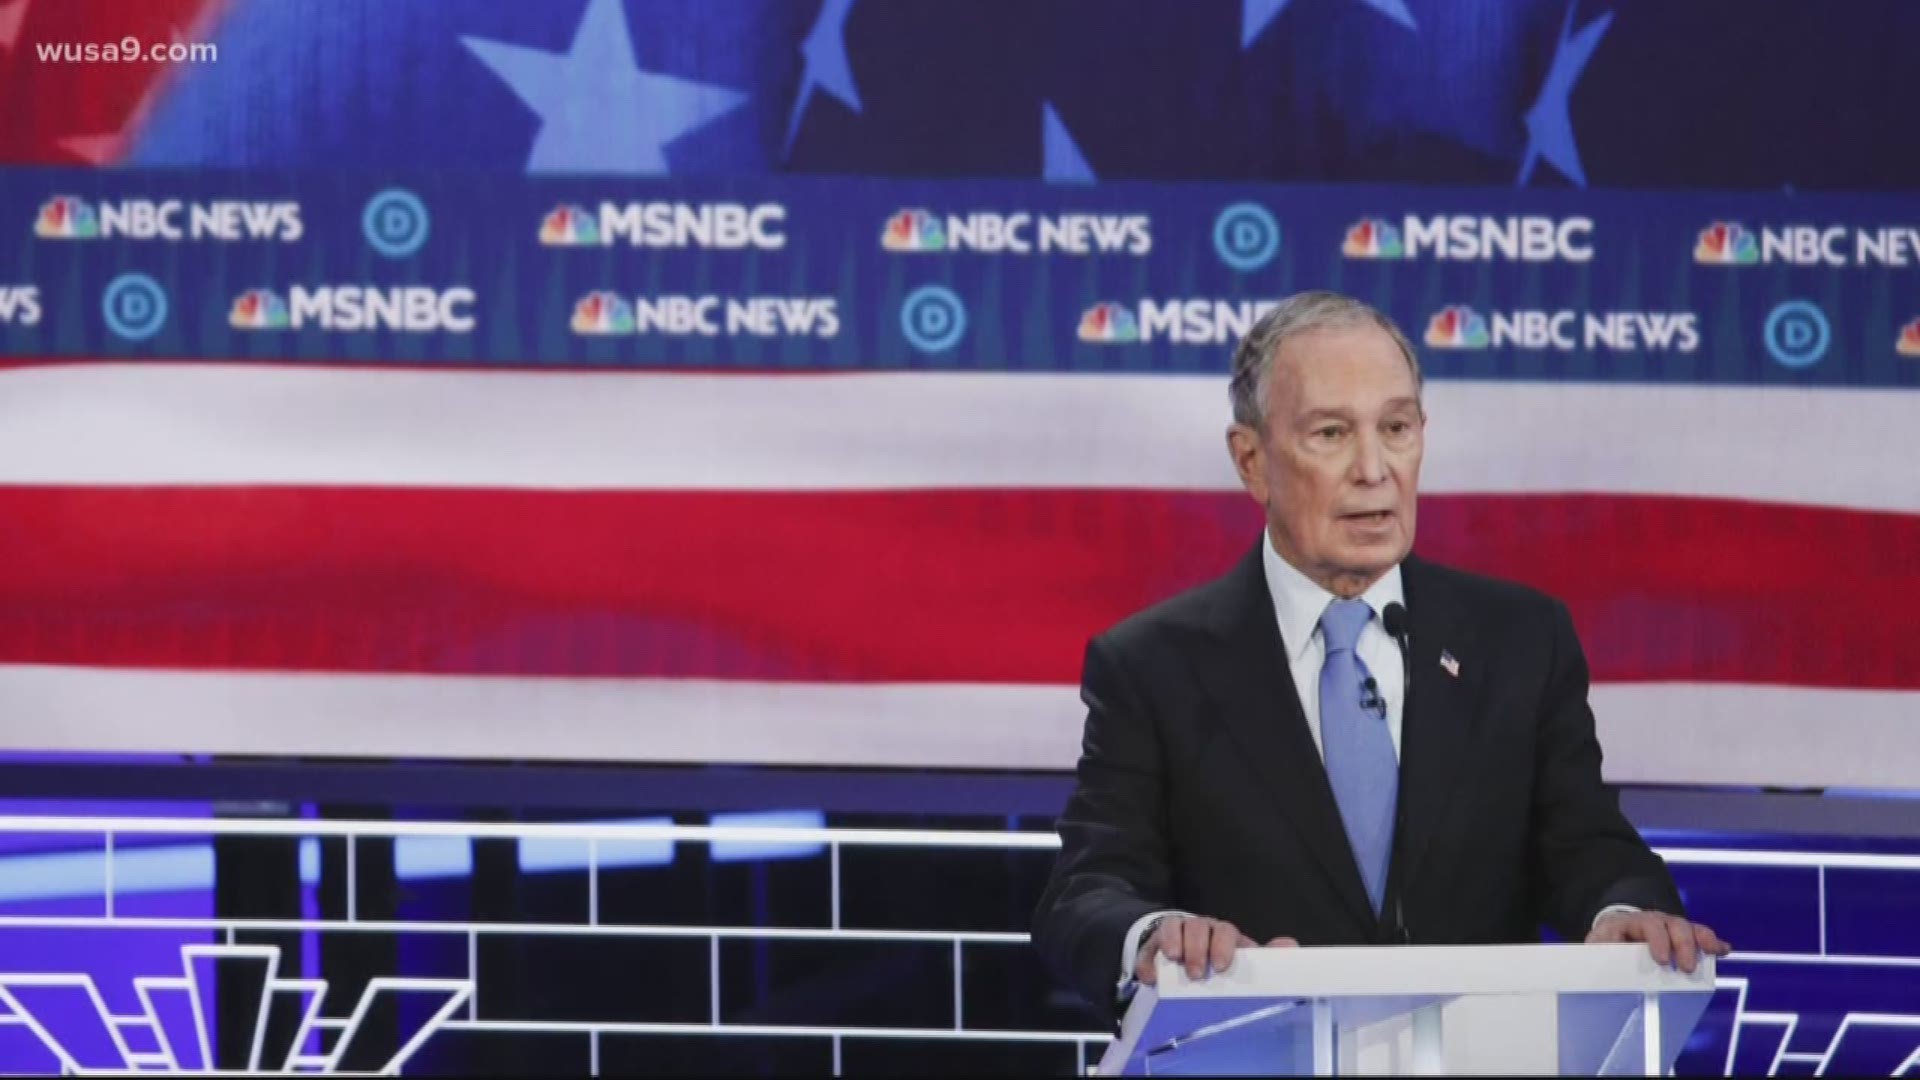 Evan Koslof from the Verify Team chats with Bruce about Michael Bloomberg's performance during the debate and other highlights